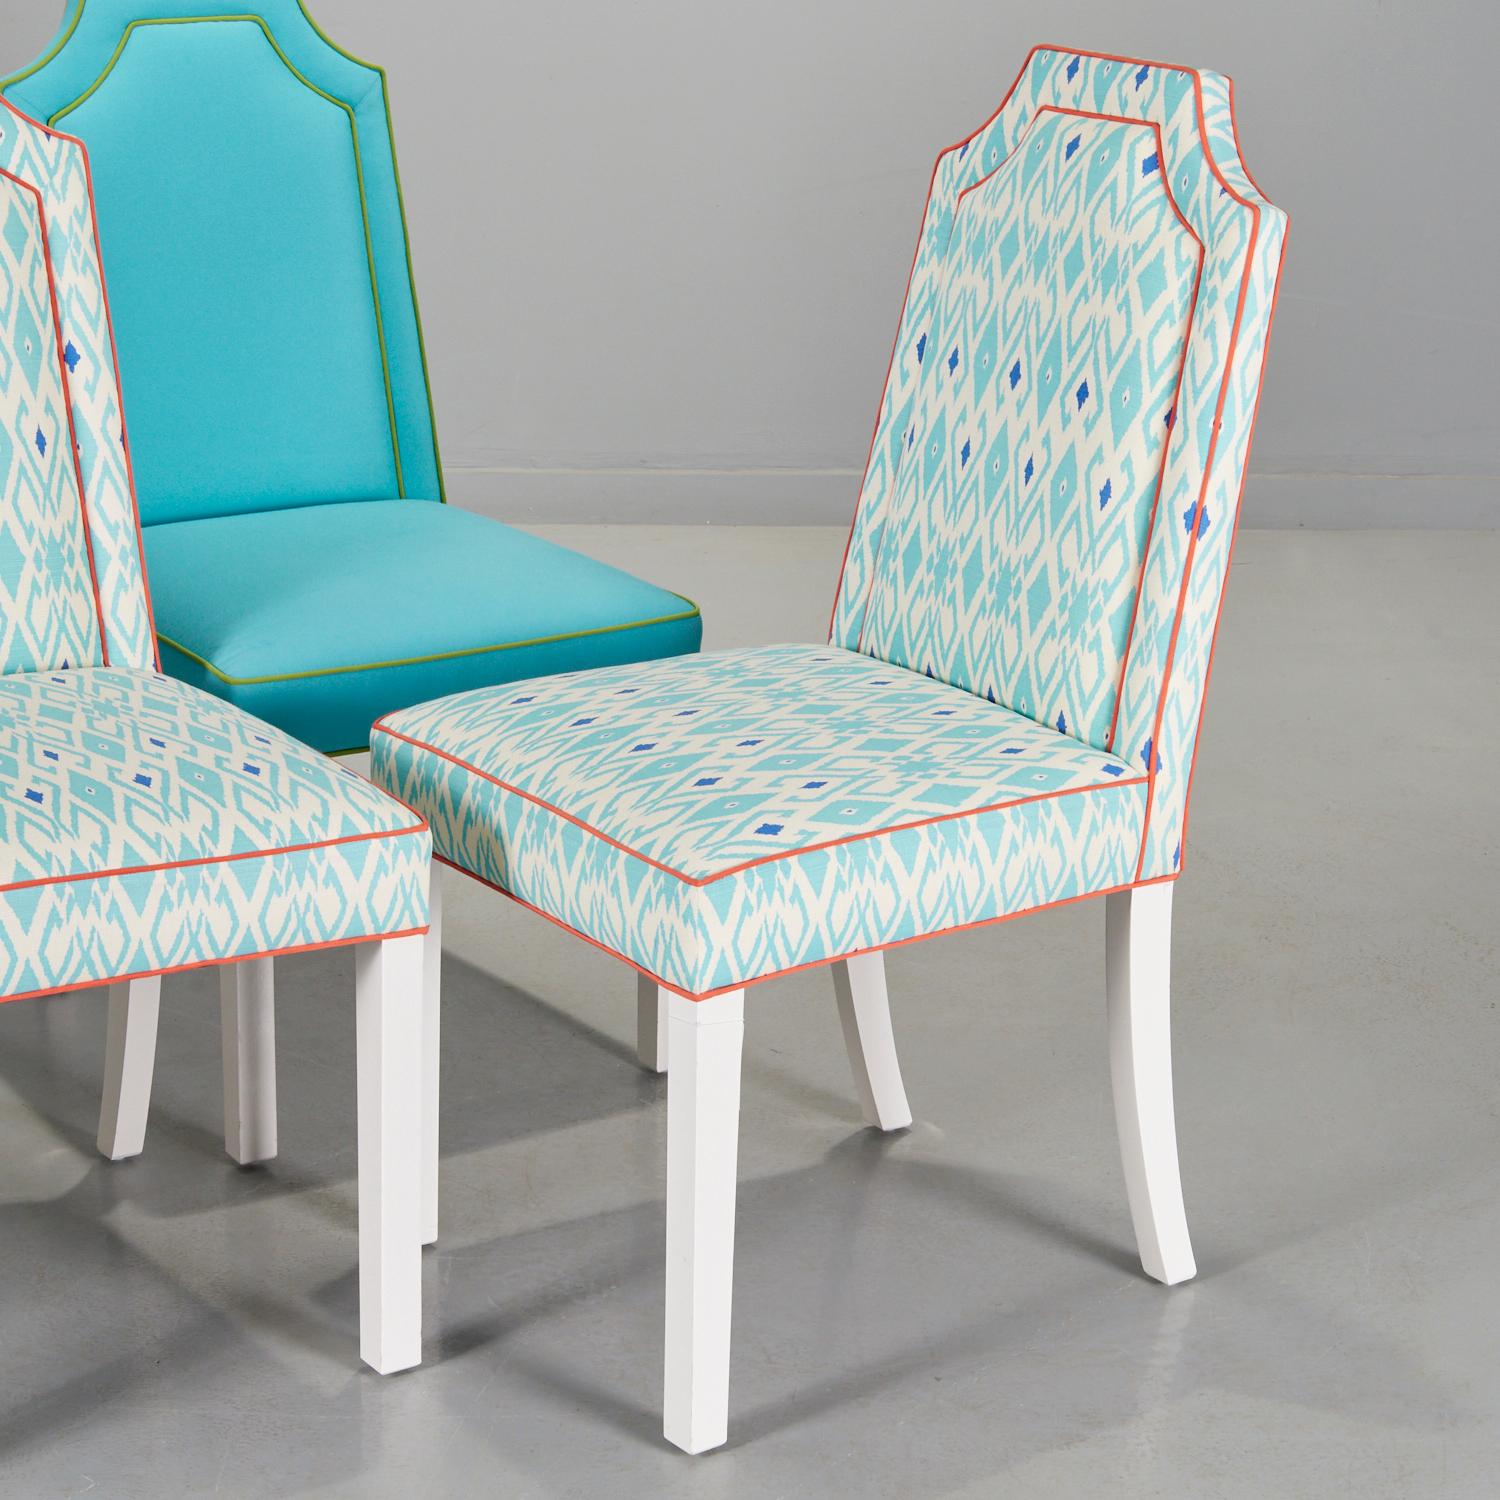 21st c., (2) pairs of colorfully upholstered Parsons side chairs, two in turquoise with lime green piping, and two in blue Ikat style pattern with coral piping, each with shaped padded seat backs, on white lacquered legs, unmarked,